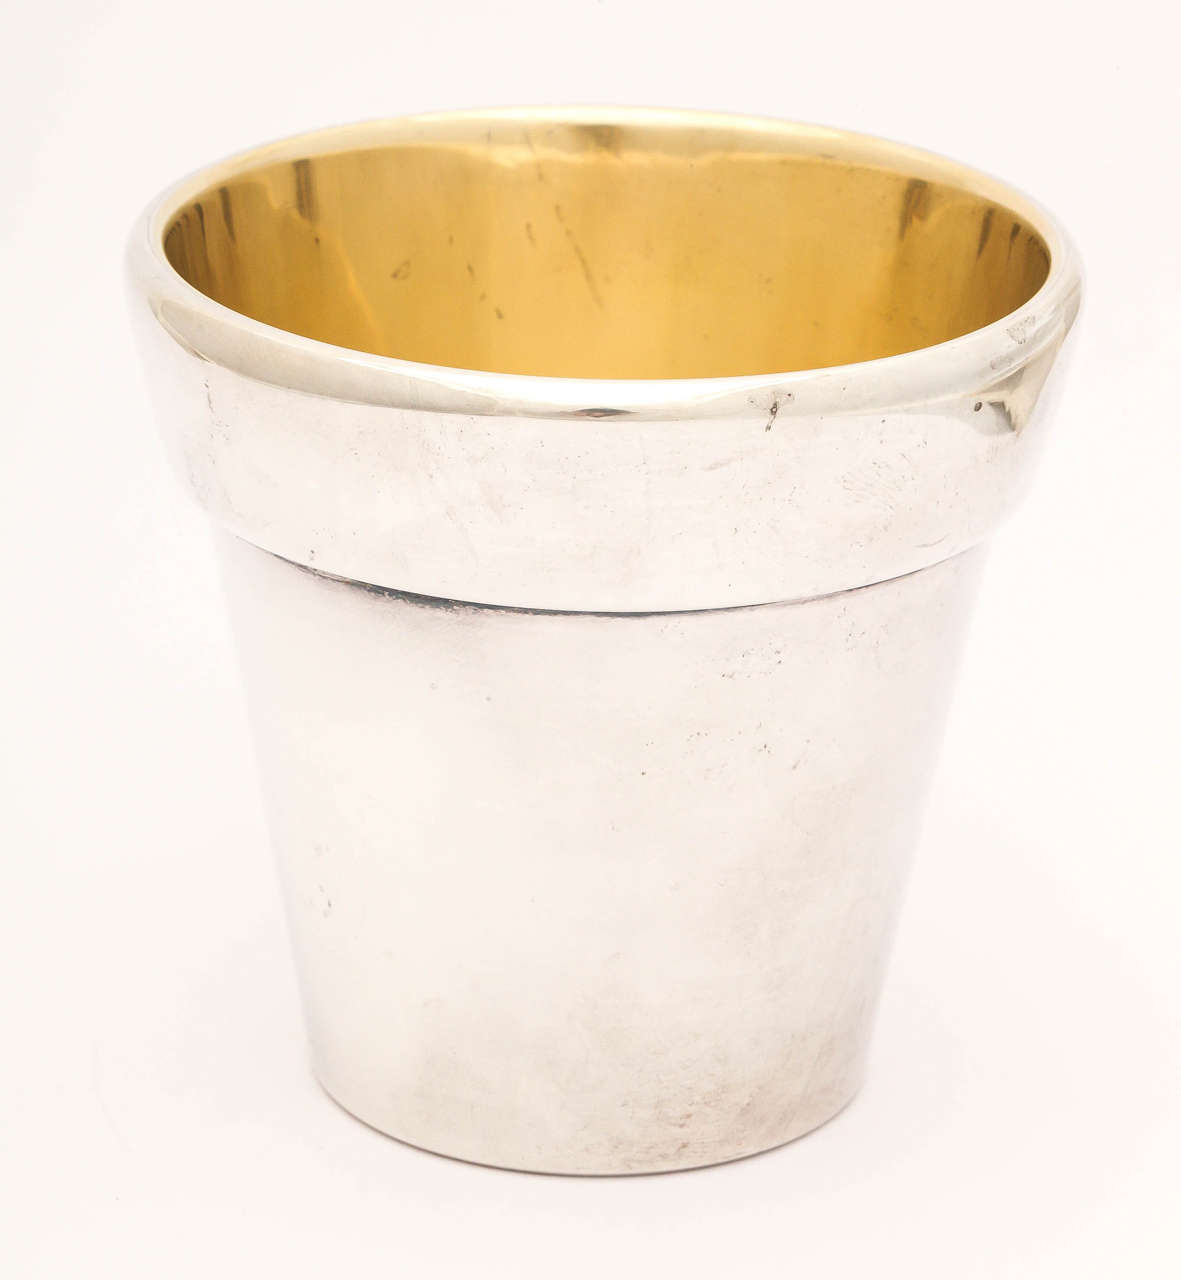 A whimsical study of a traditional terracotta flower pot made in sterling silver with a lemon gilding on the interior. The piece is incredibly heavy, being made in an exceptionally thick gauge of silver.

The piece has full marks for Bulgari and